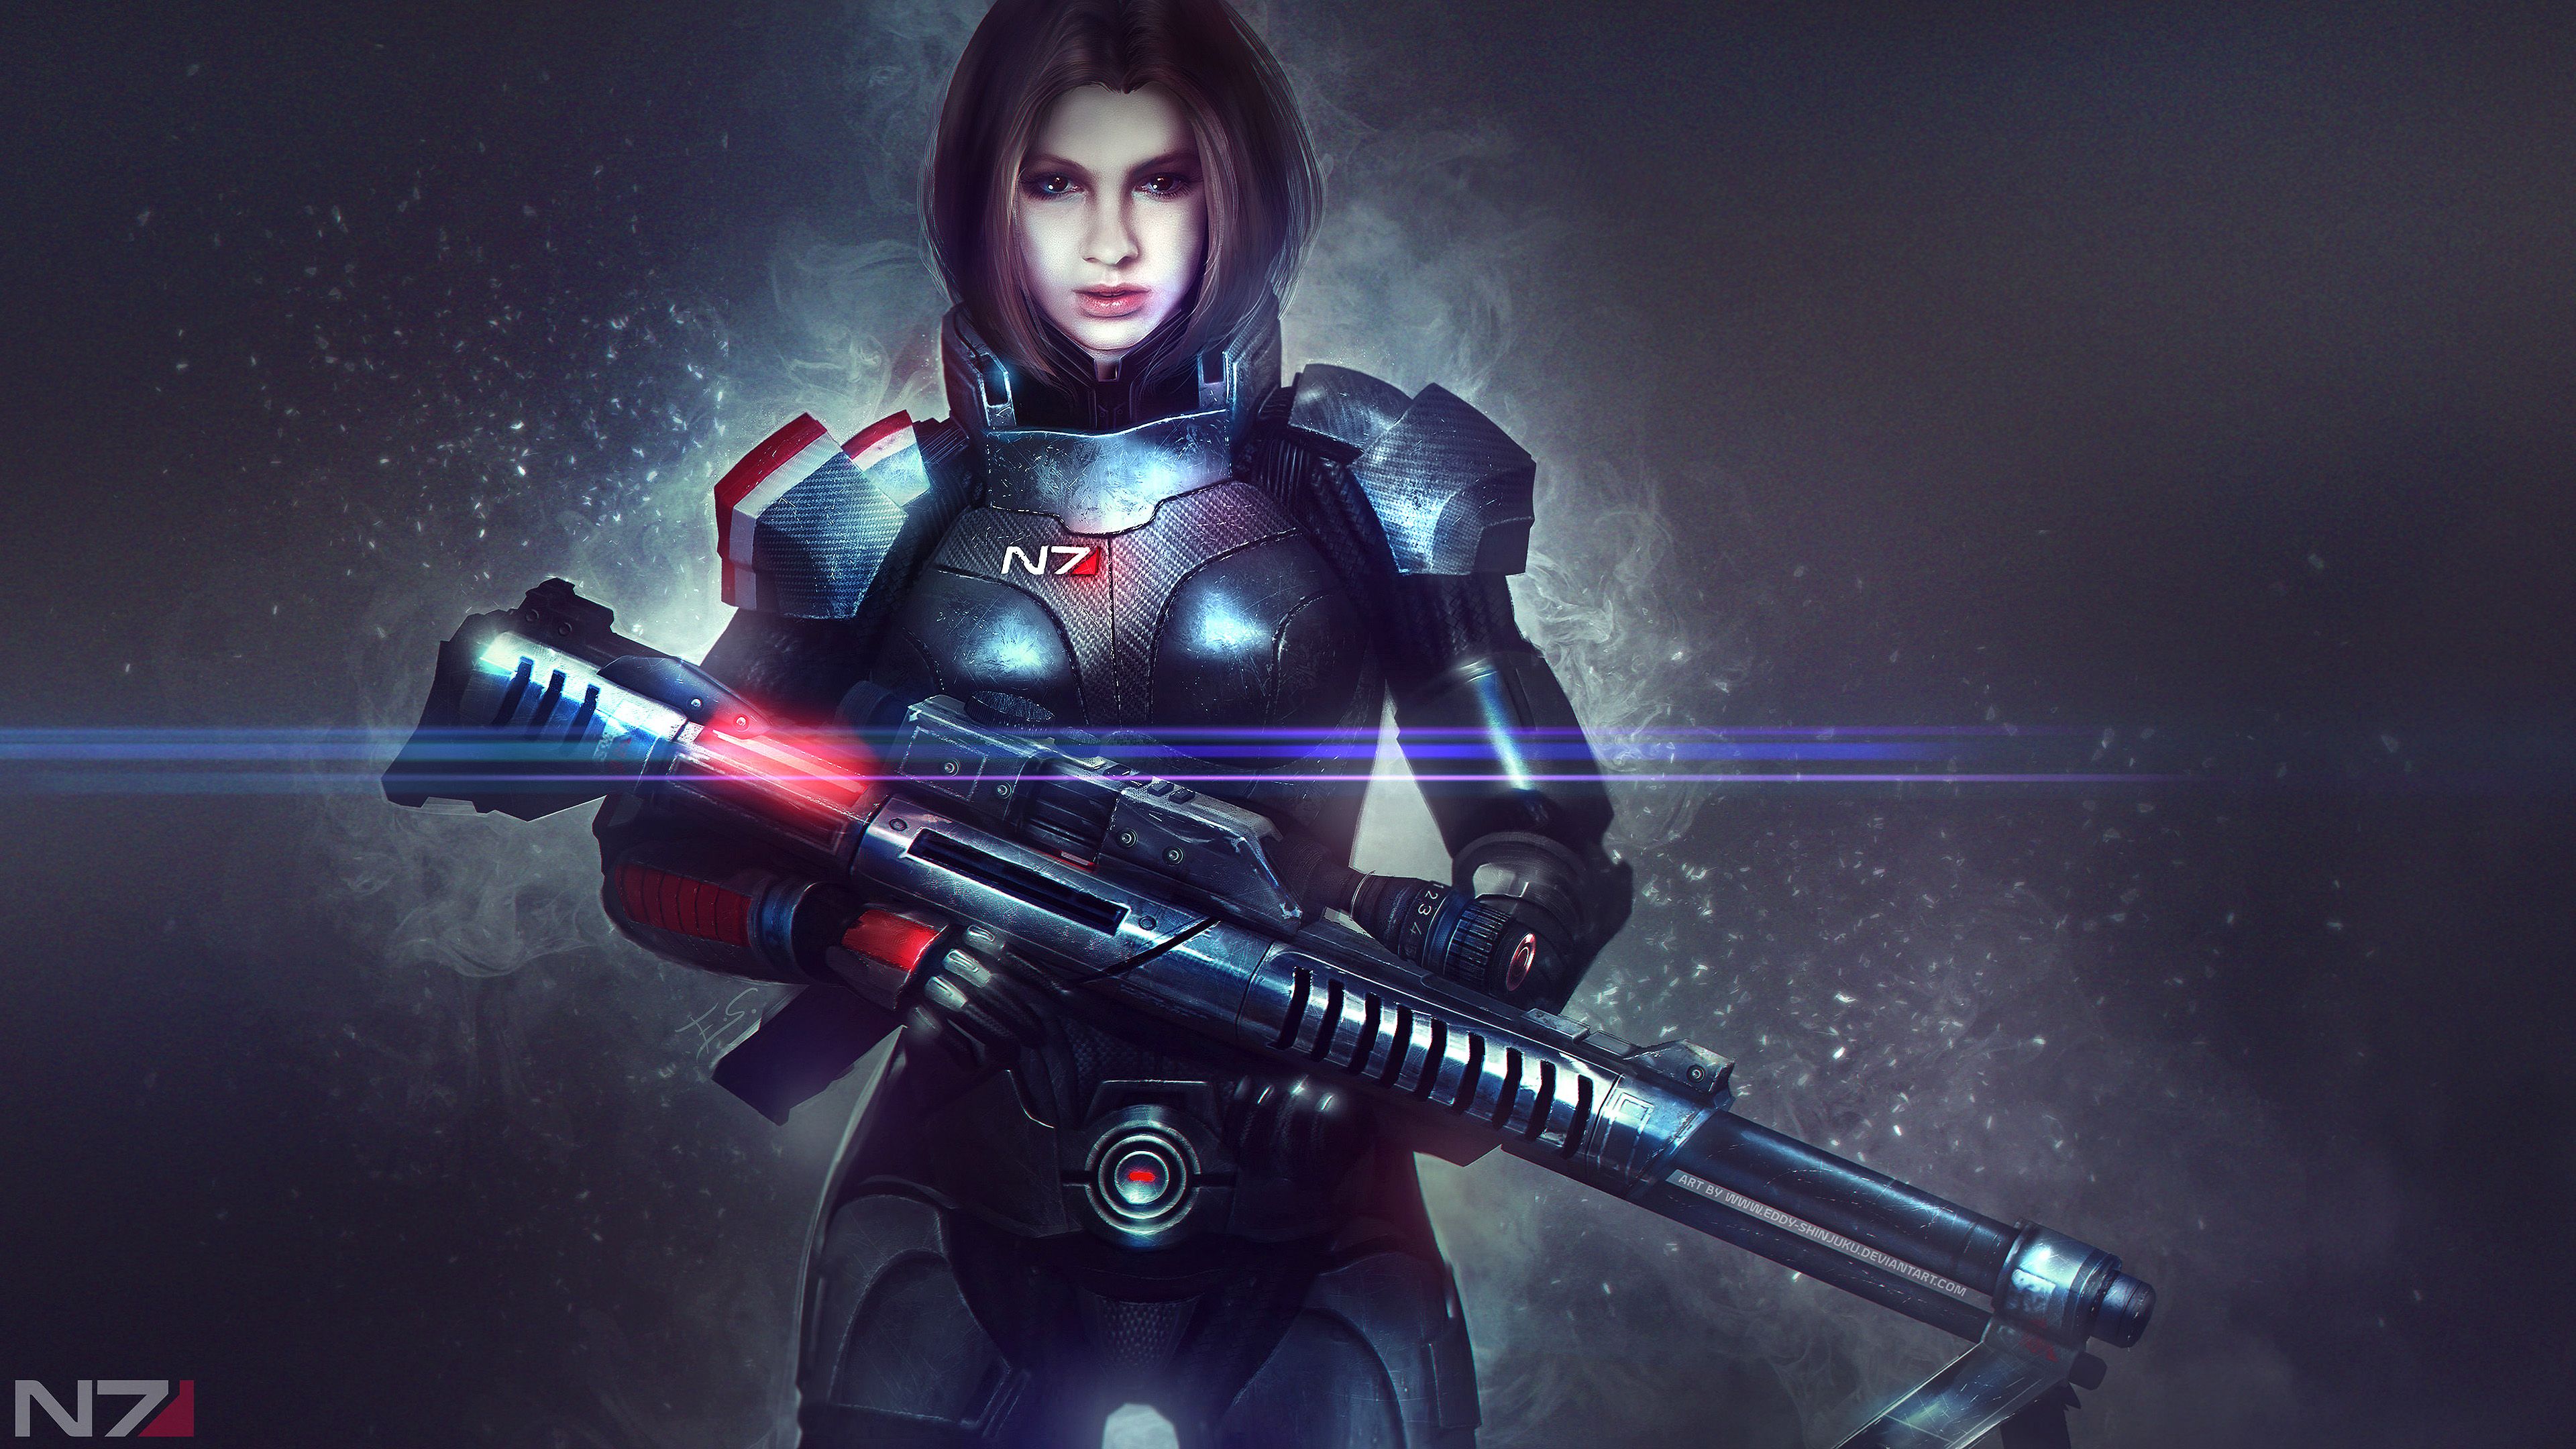 Shepard 4K wallpaper for your desktop or mobile screen free and easy to download